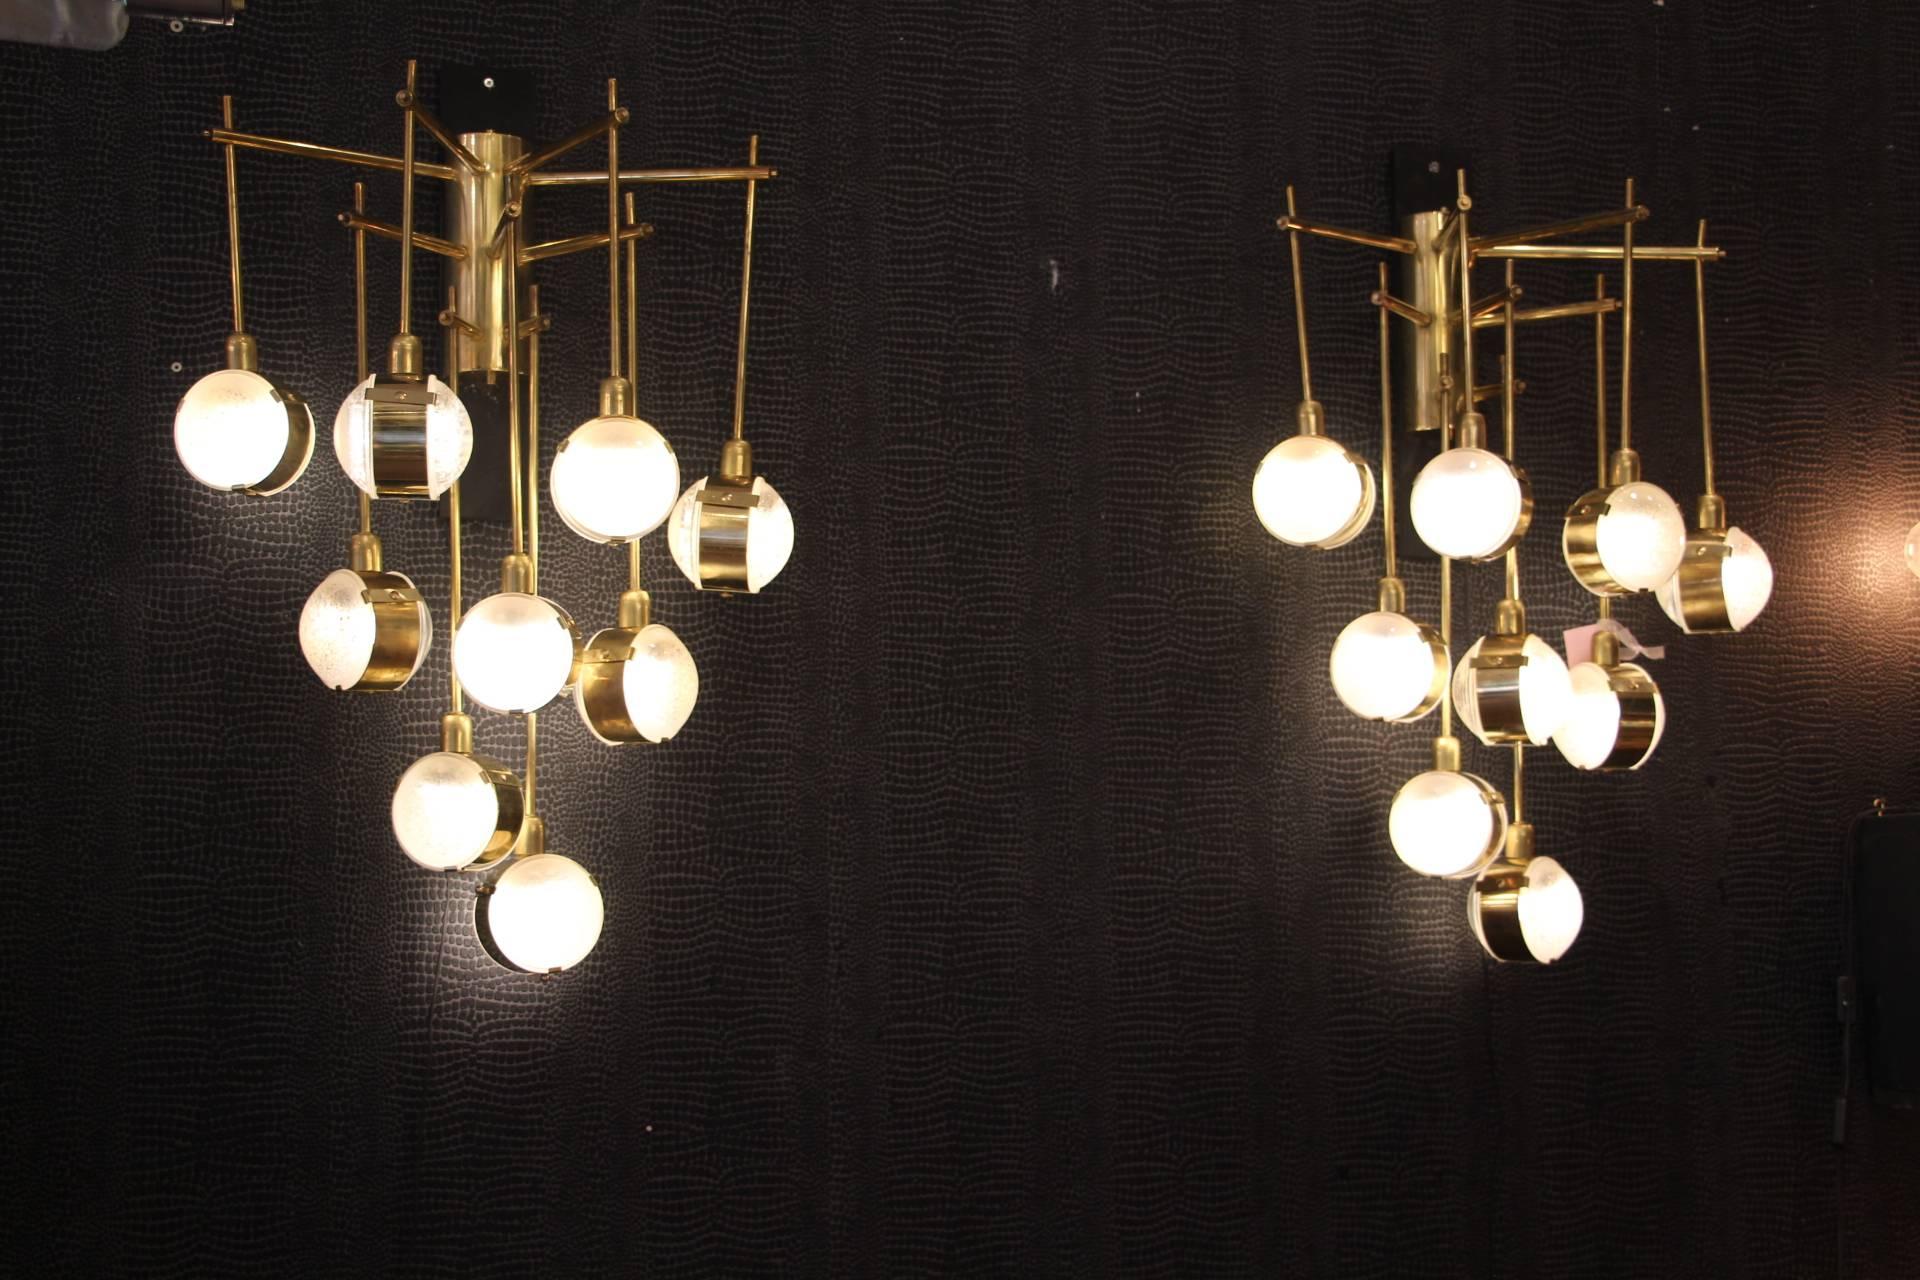 This pair of wall lights features nine lights each.
Each vertical arm is finished with a double sided glass, circled in brass ring. All glass pieces gave a lenses shape and show quartz inclusions inside.
These sconces are really unusual and